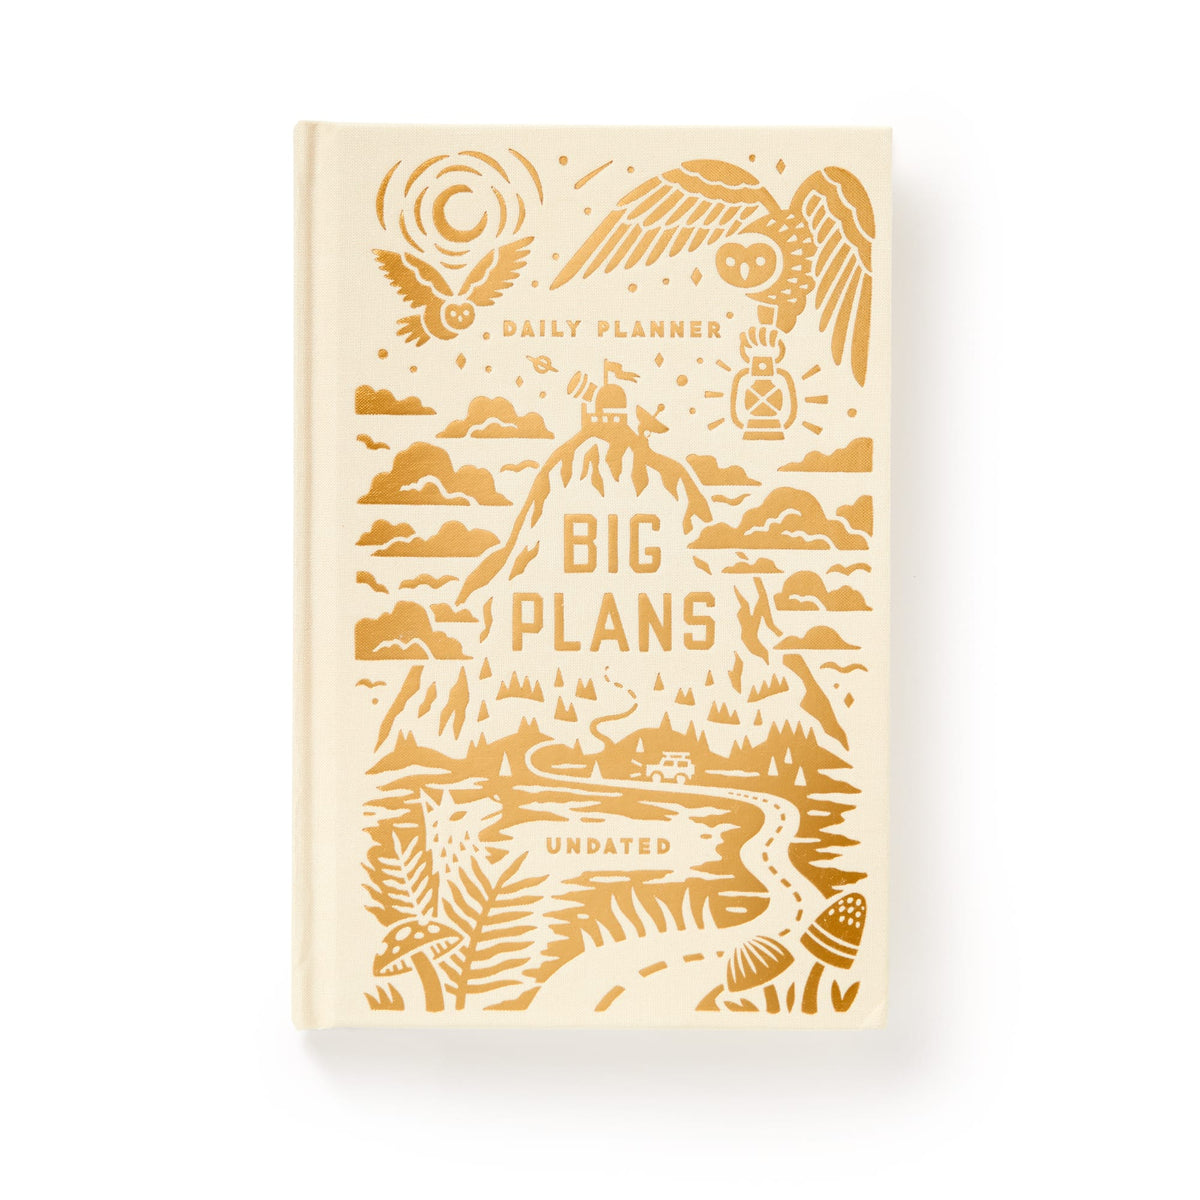 Big Plans Undated Daily Planner